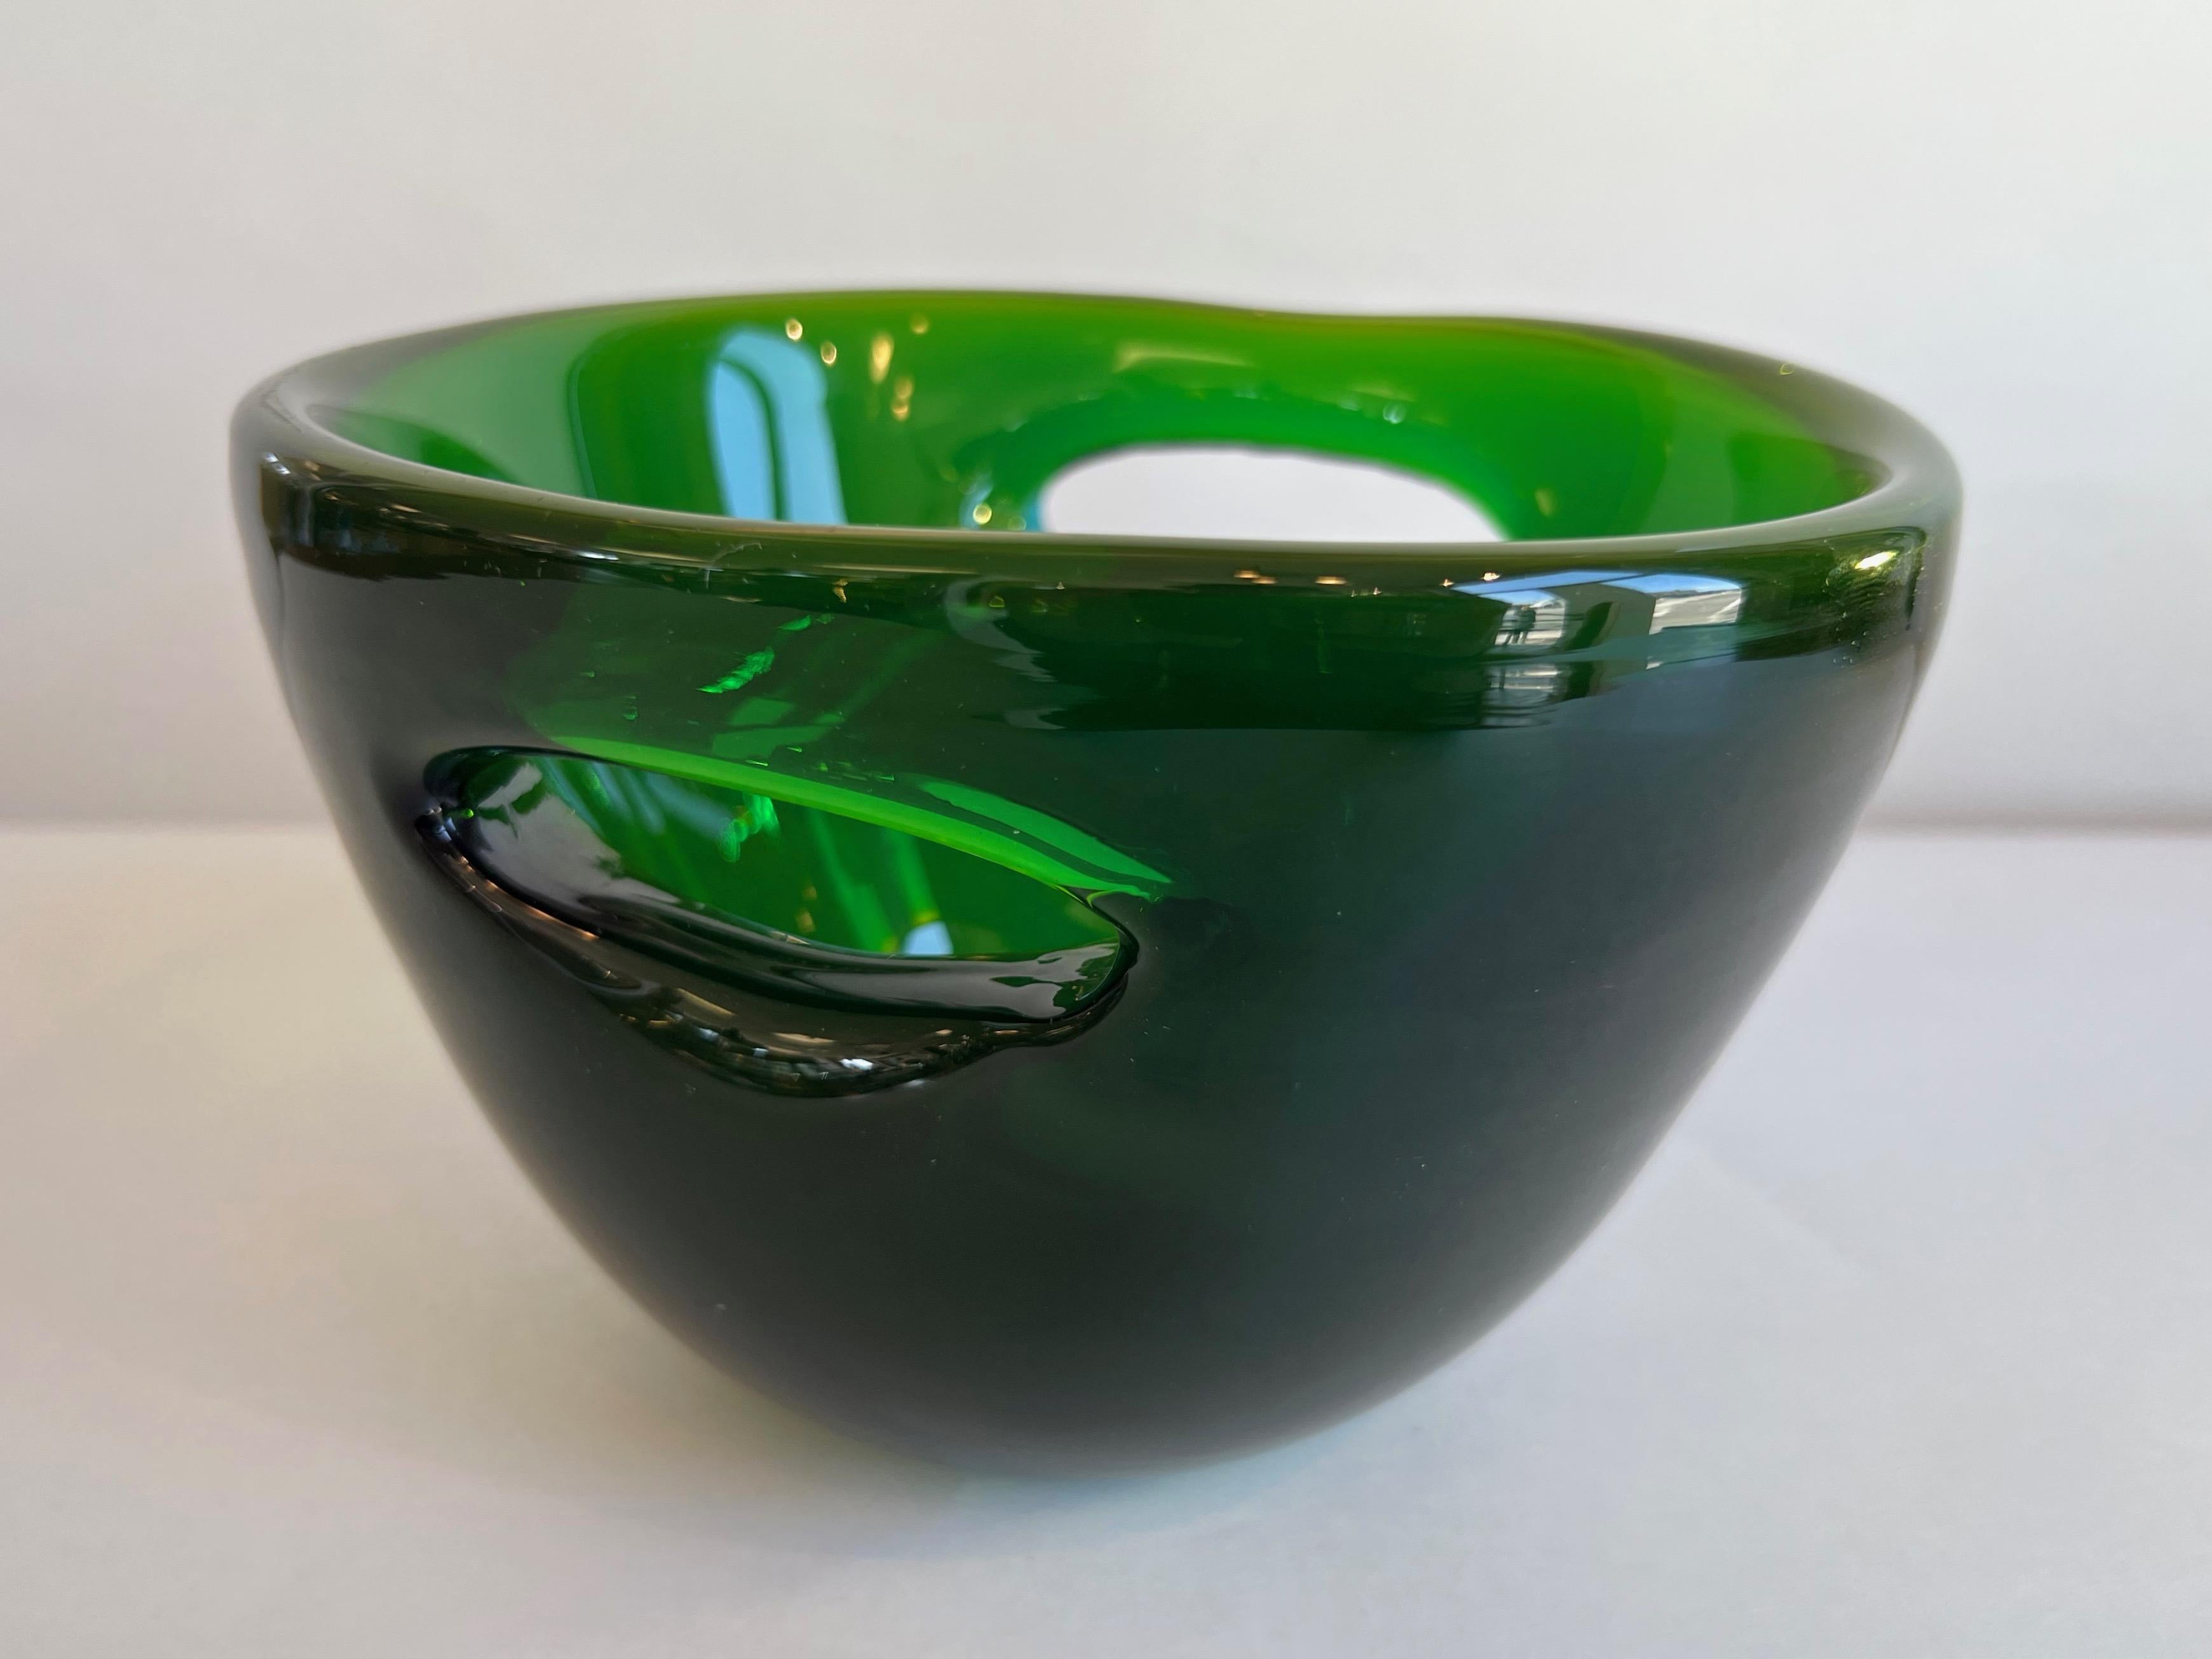 A very rare 1958 Blenko #5819 emerald green double-pierced glass bowl by Wayne Husted.

Produced in this rich and luminous shade of emerald green for only one year—1958—it features a pair of large piercings on either side of its thick-walled body.